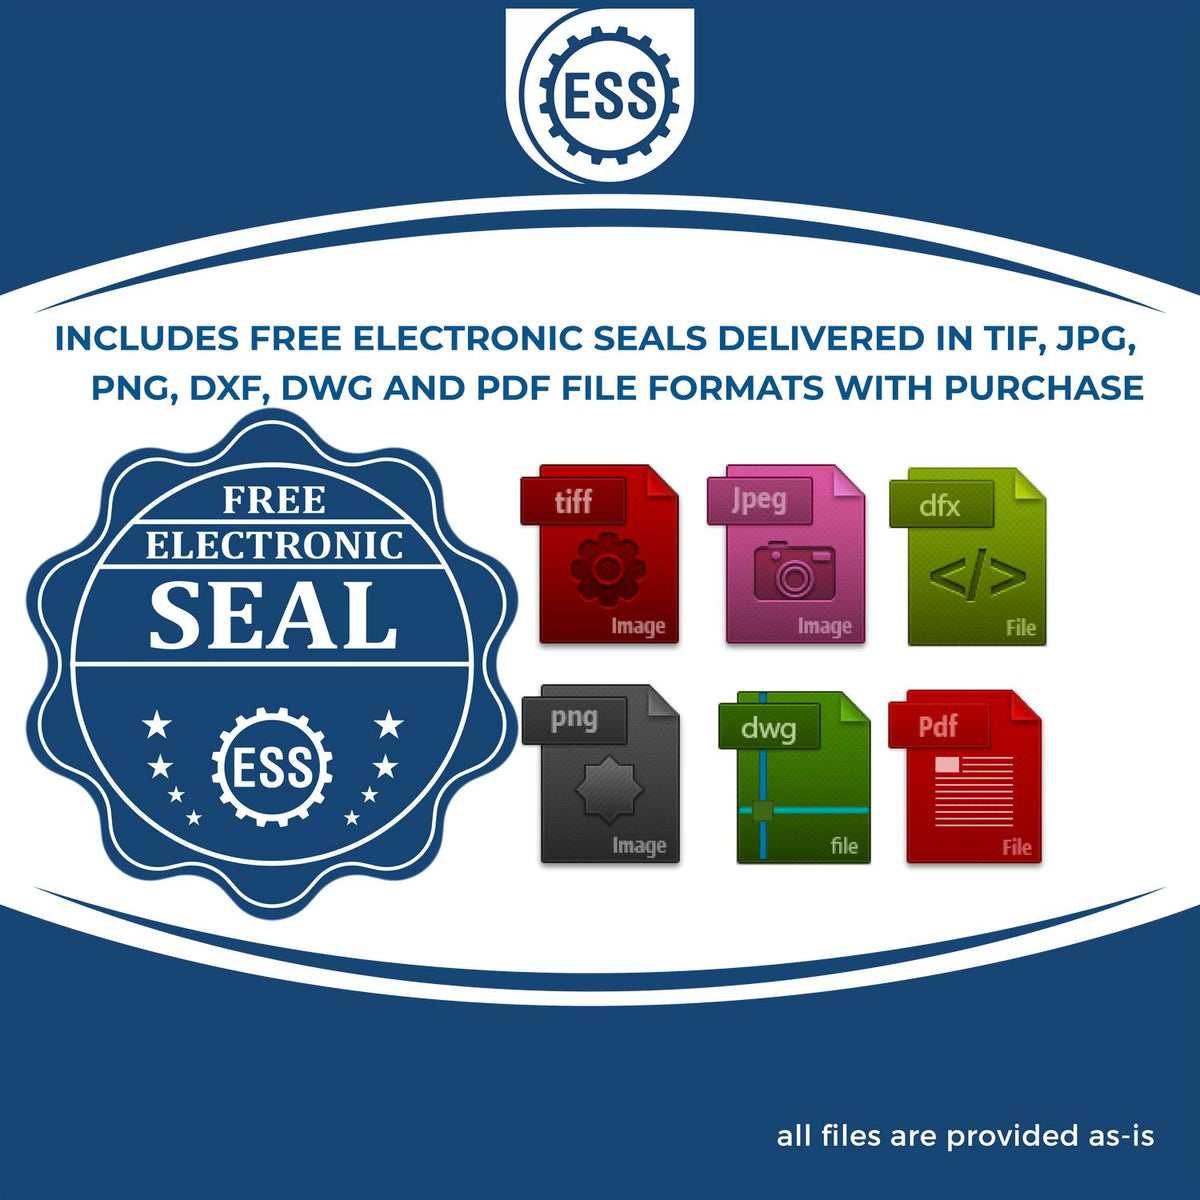 An infographic for the free electronic seal for the Self-Inking State Seal New York Notary Stamp illustrating the different file type icons such as DXF, DWG, TIF, JPG and PNG.